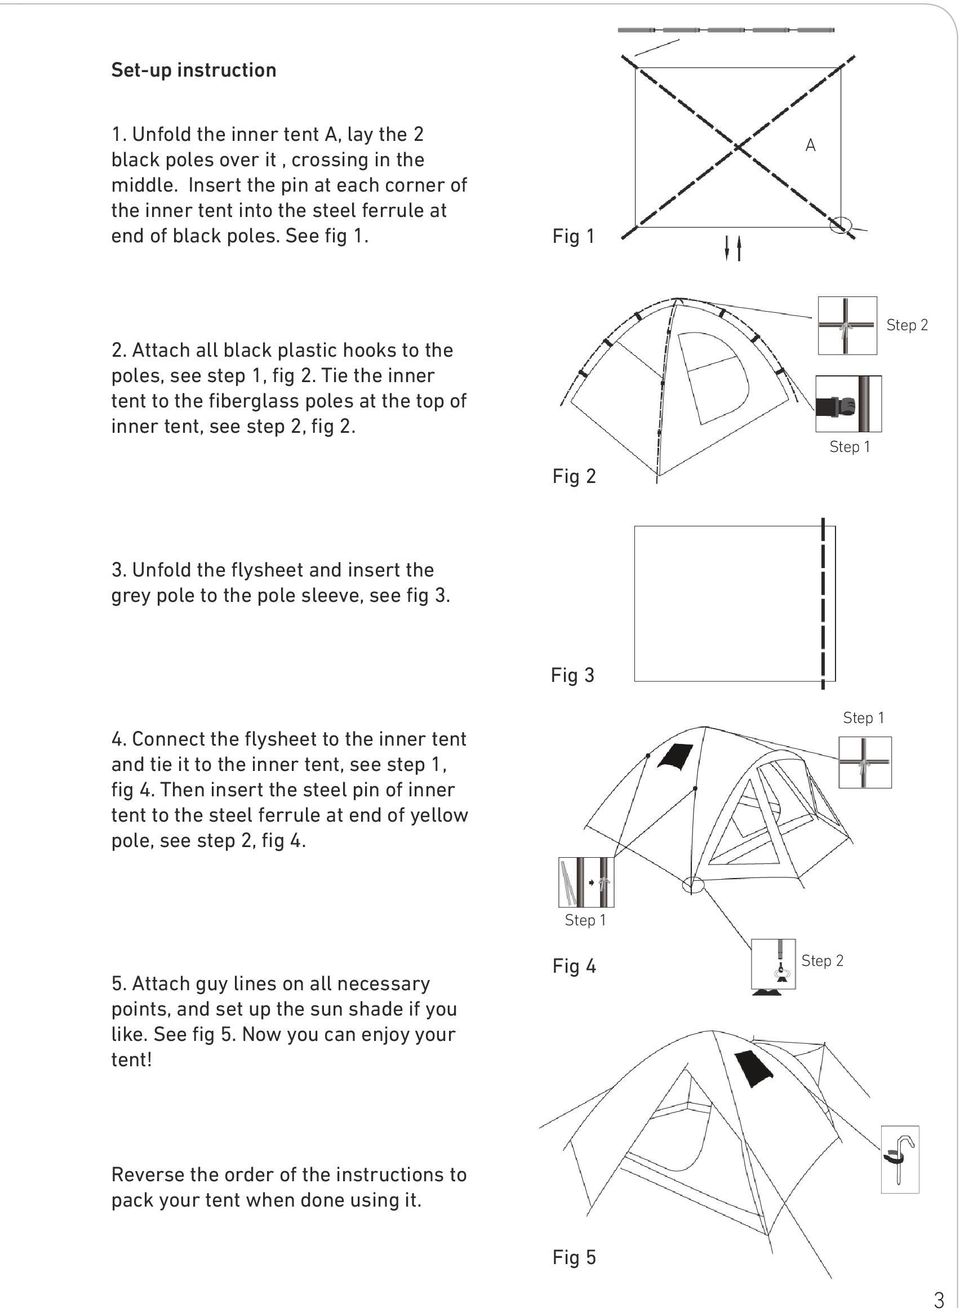 Unfold the flysheet and insert the grey pole to the pole sleeve, see fig 3. Fig 3 4. Connect the flysheet to the inner tent and tie it to the inner tent, see step 1, fig 4.